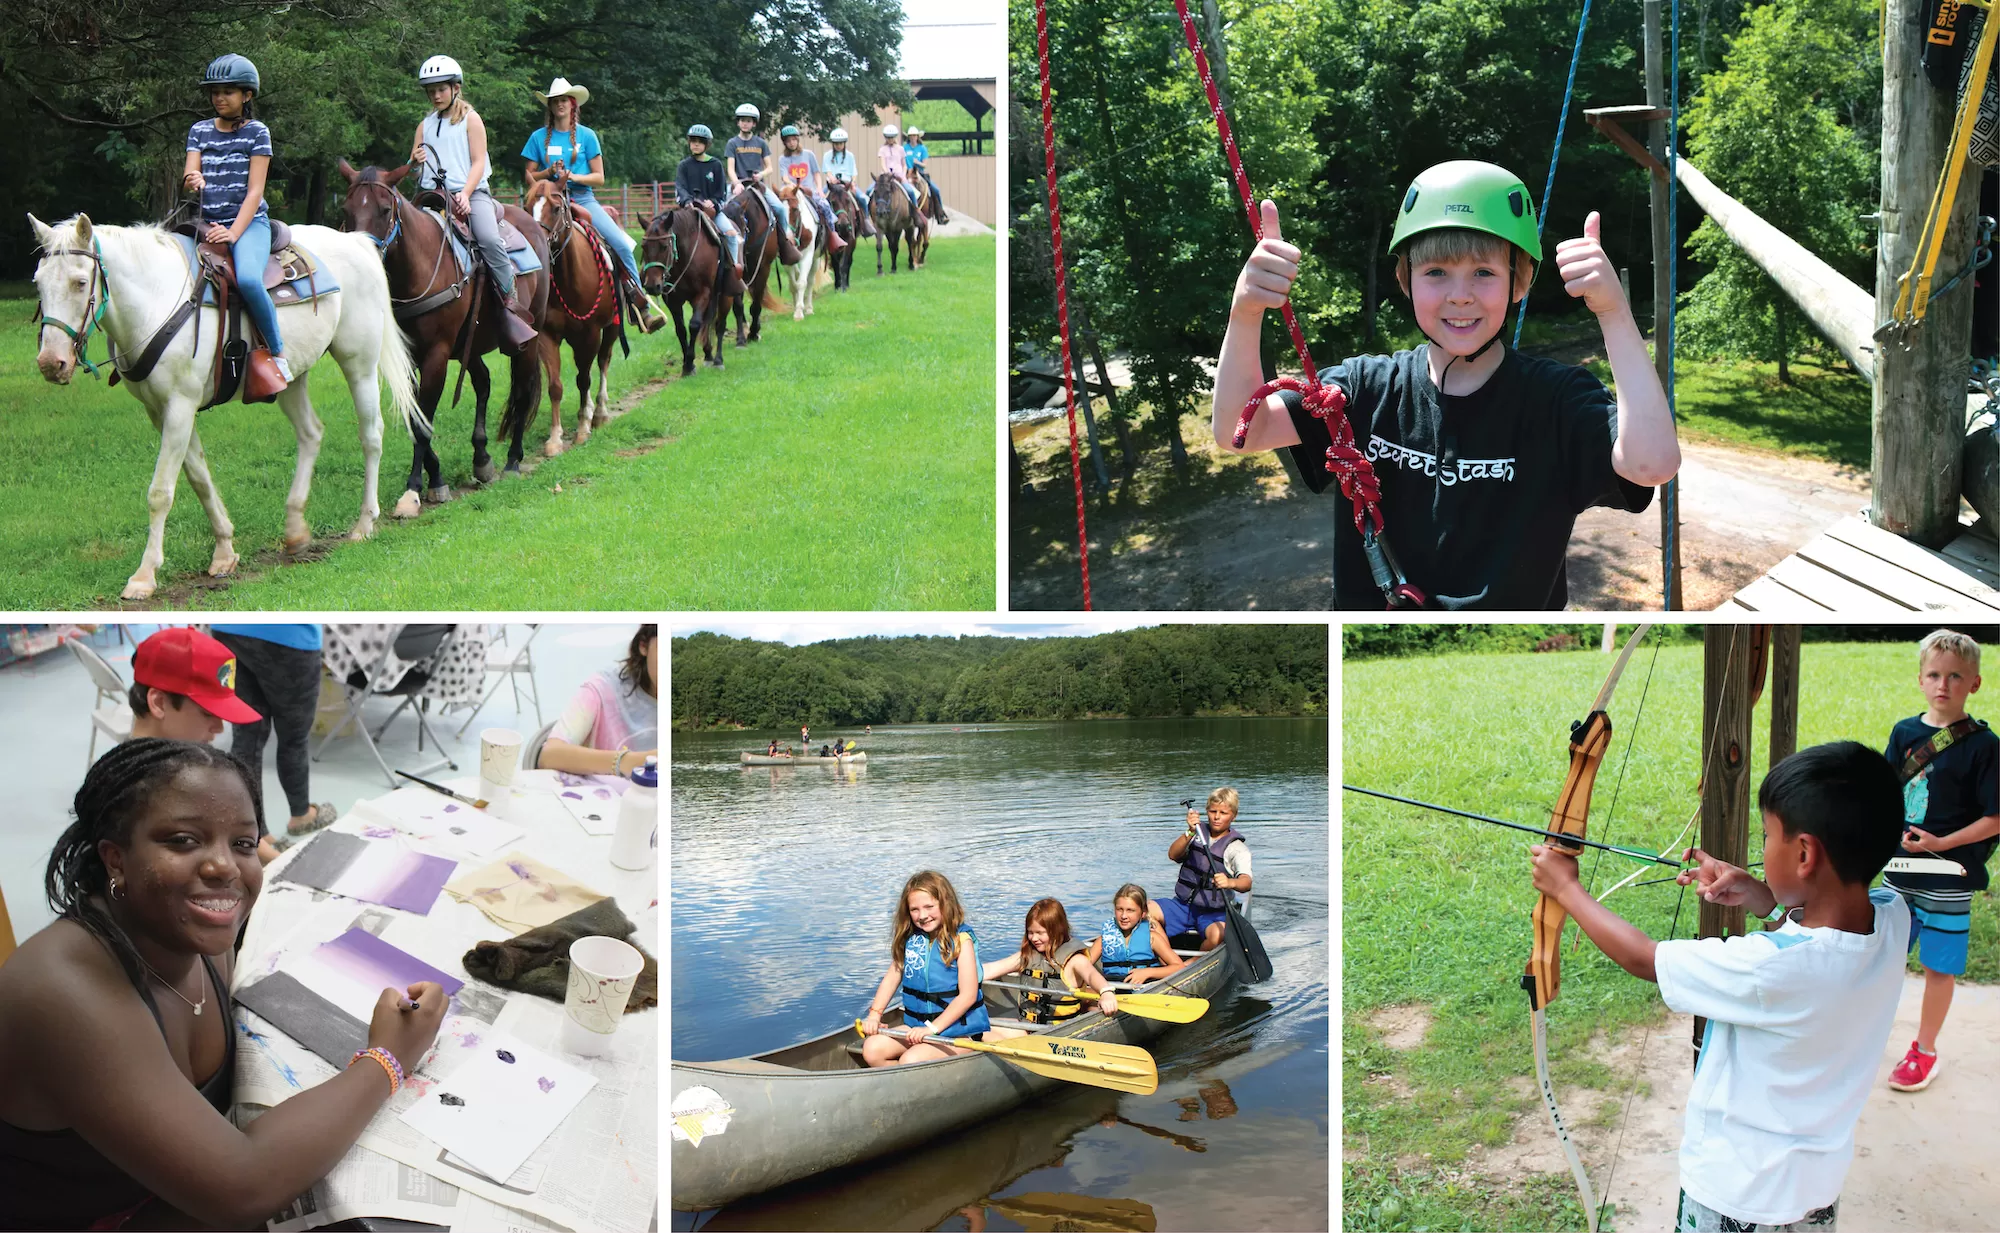 ymca camp lakewood activities collage of archery, canoeing, arts and crafts, horseback trail riding, and climbing towers